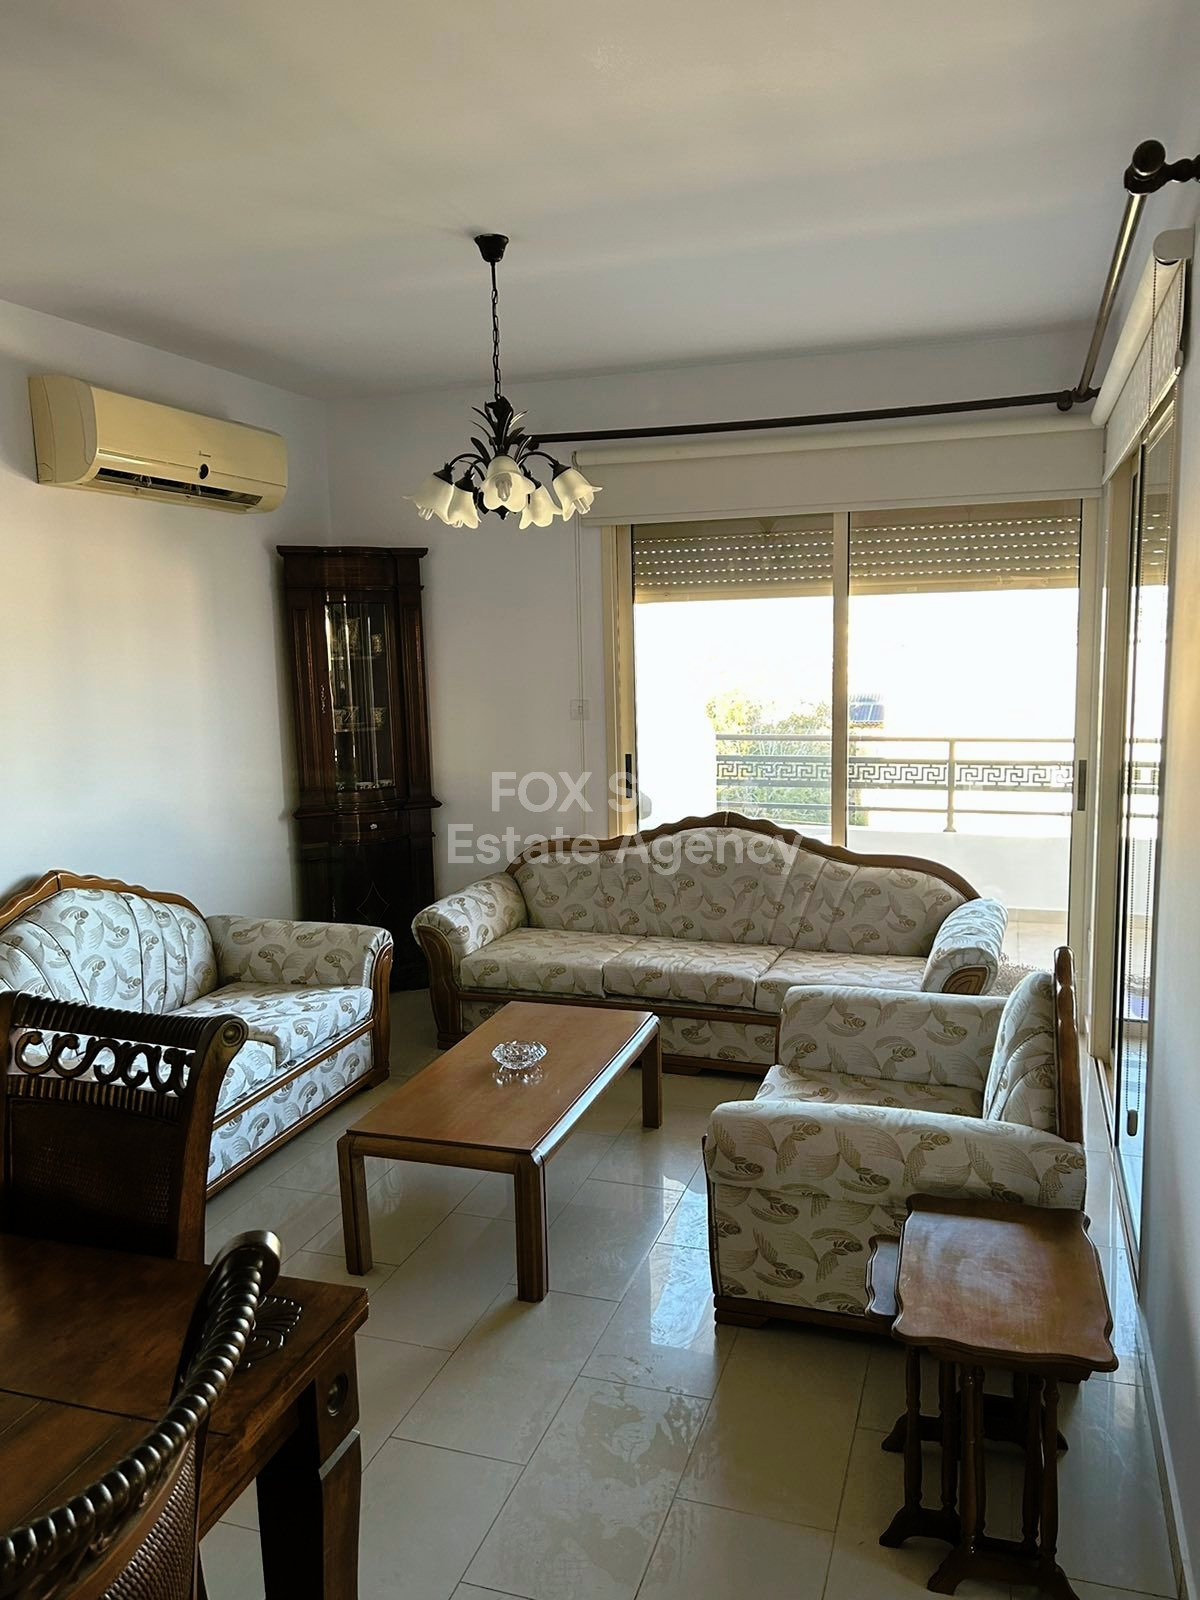 Apartment, For Sale, Limassol, Panthea  3 Bedrooms 1 Bathroo.....